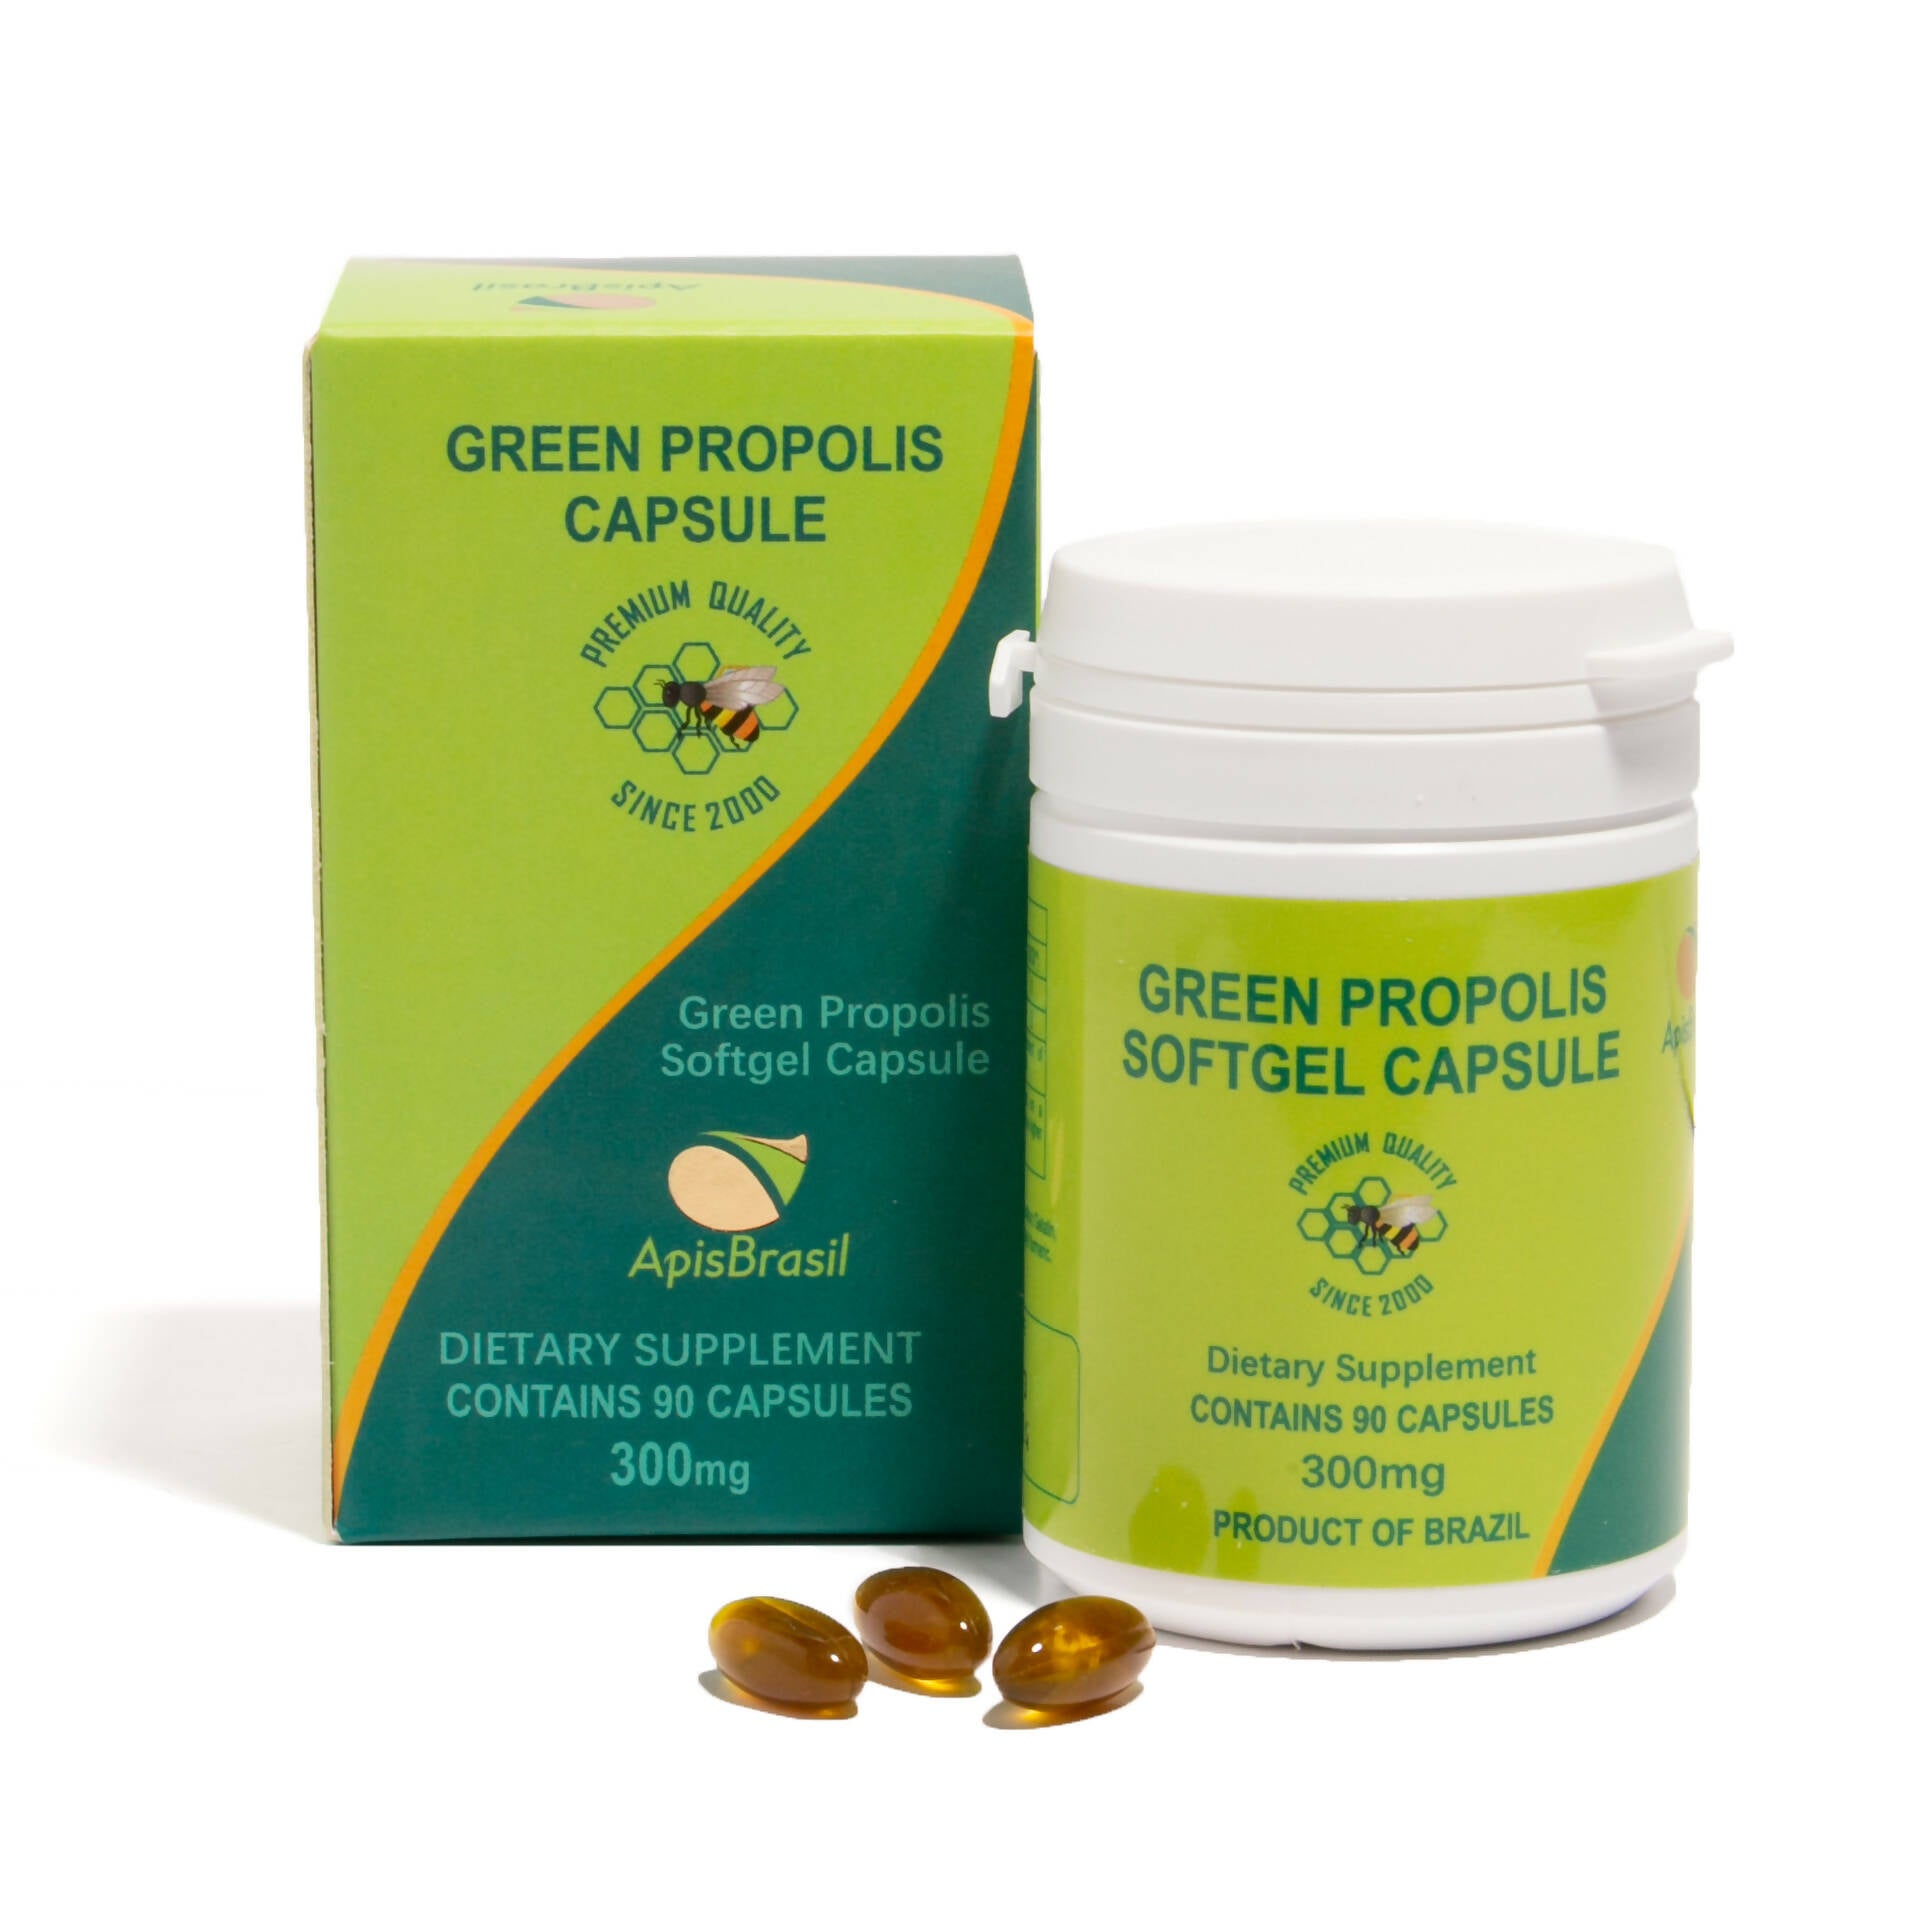 ApisBrasil - Brazilian Green Propolis Extract 900mg/Daily Per 3 Softgels Capsules- Natural Immune Support - Antioxidant - Premium Quality - Gluten Free - 90 Count (Pack of 1)